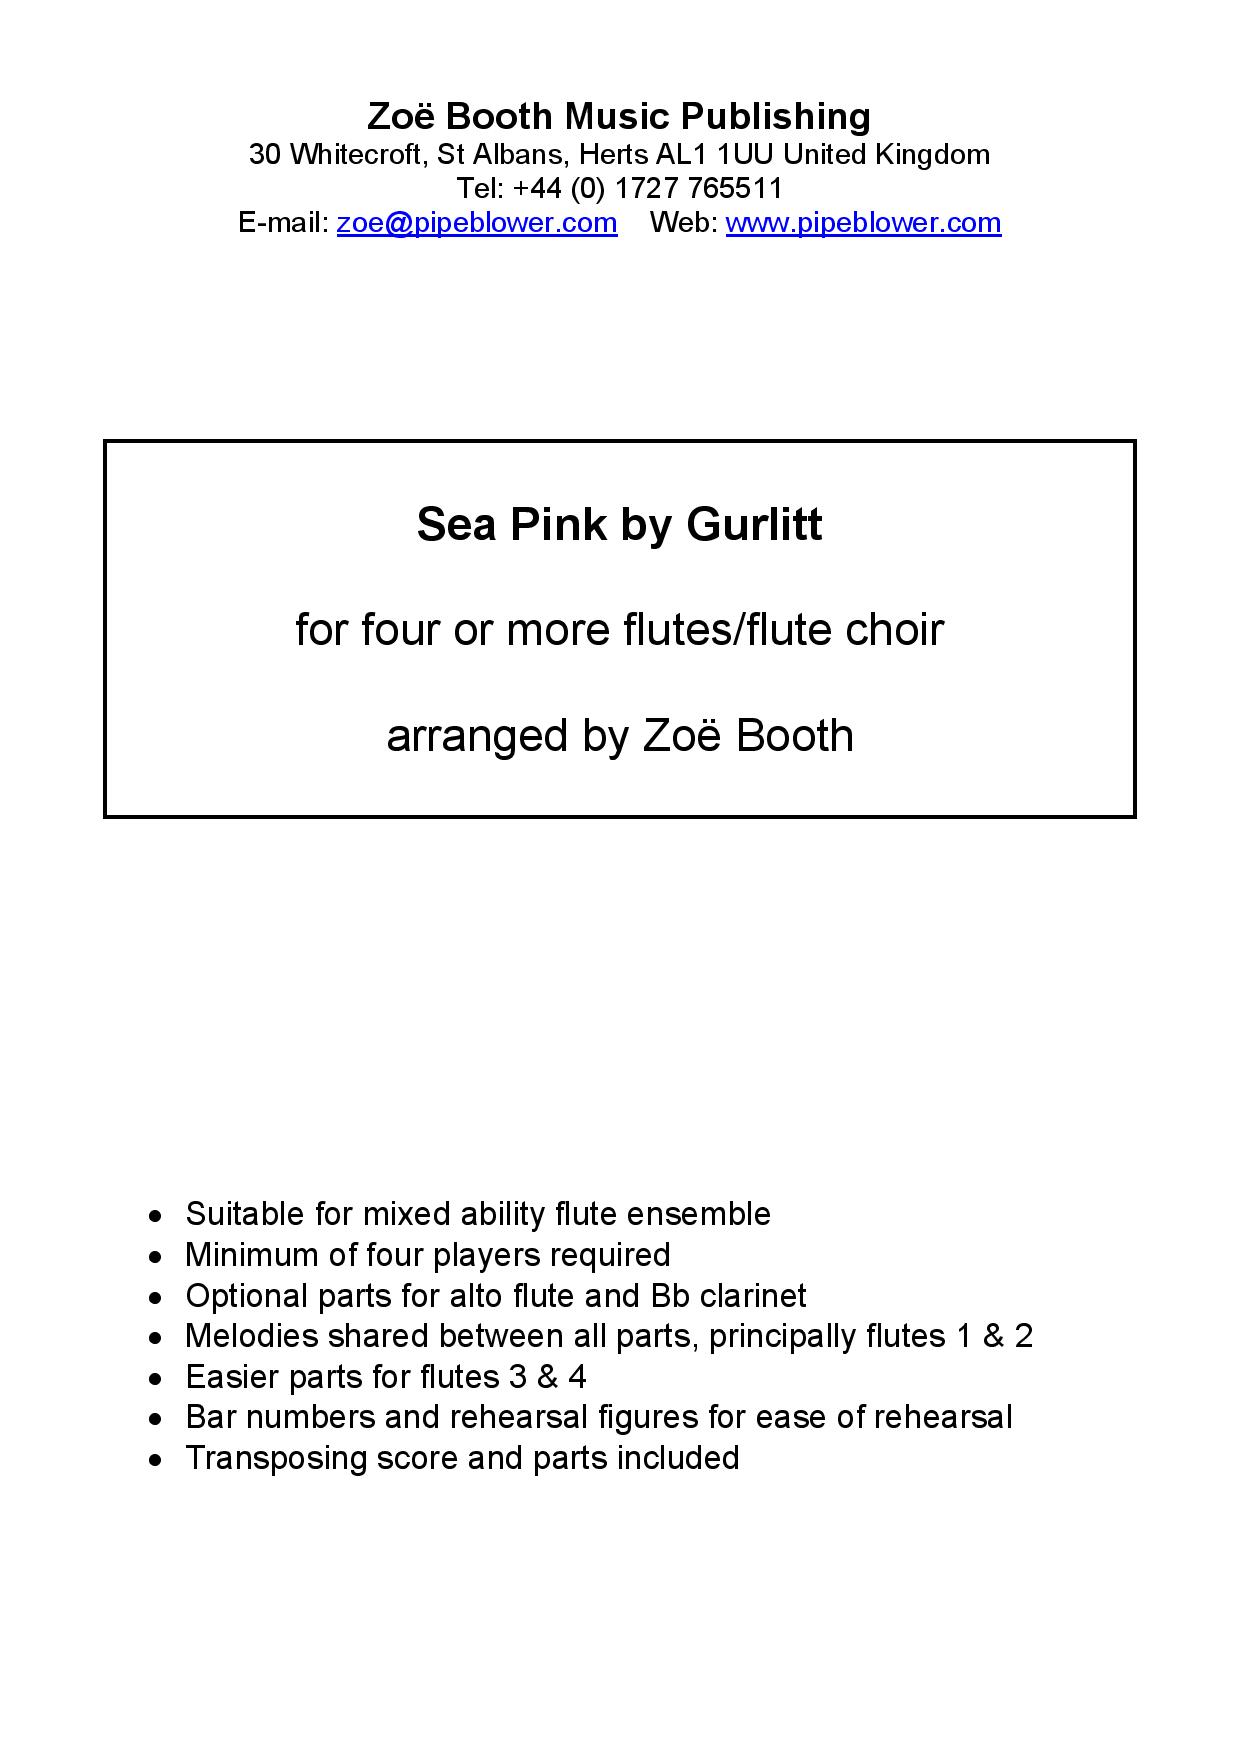 Sea Pink by Gurlitt  arranged by Zoë Booth for four or more flutes/flute choir